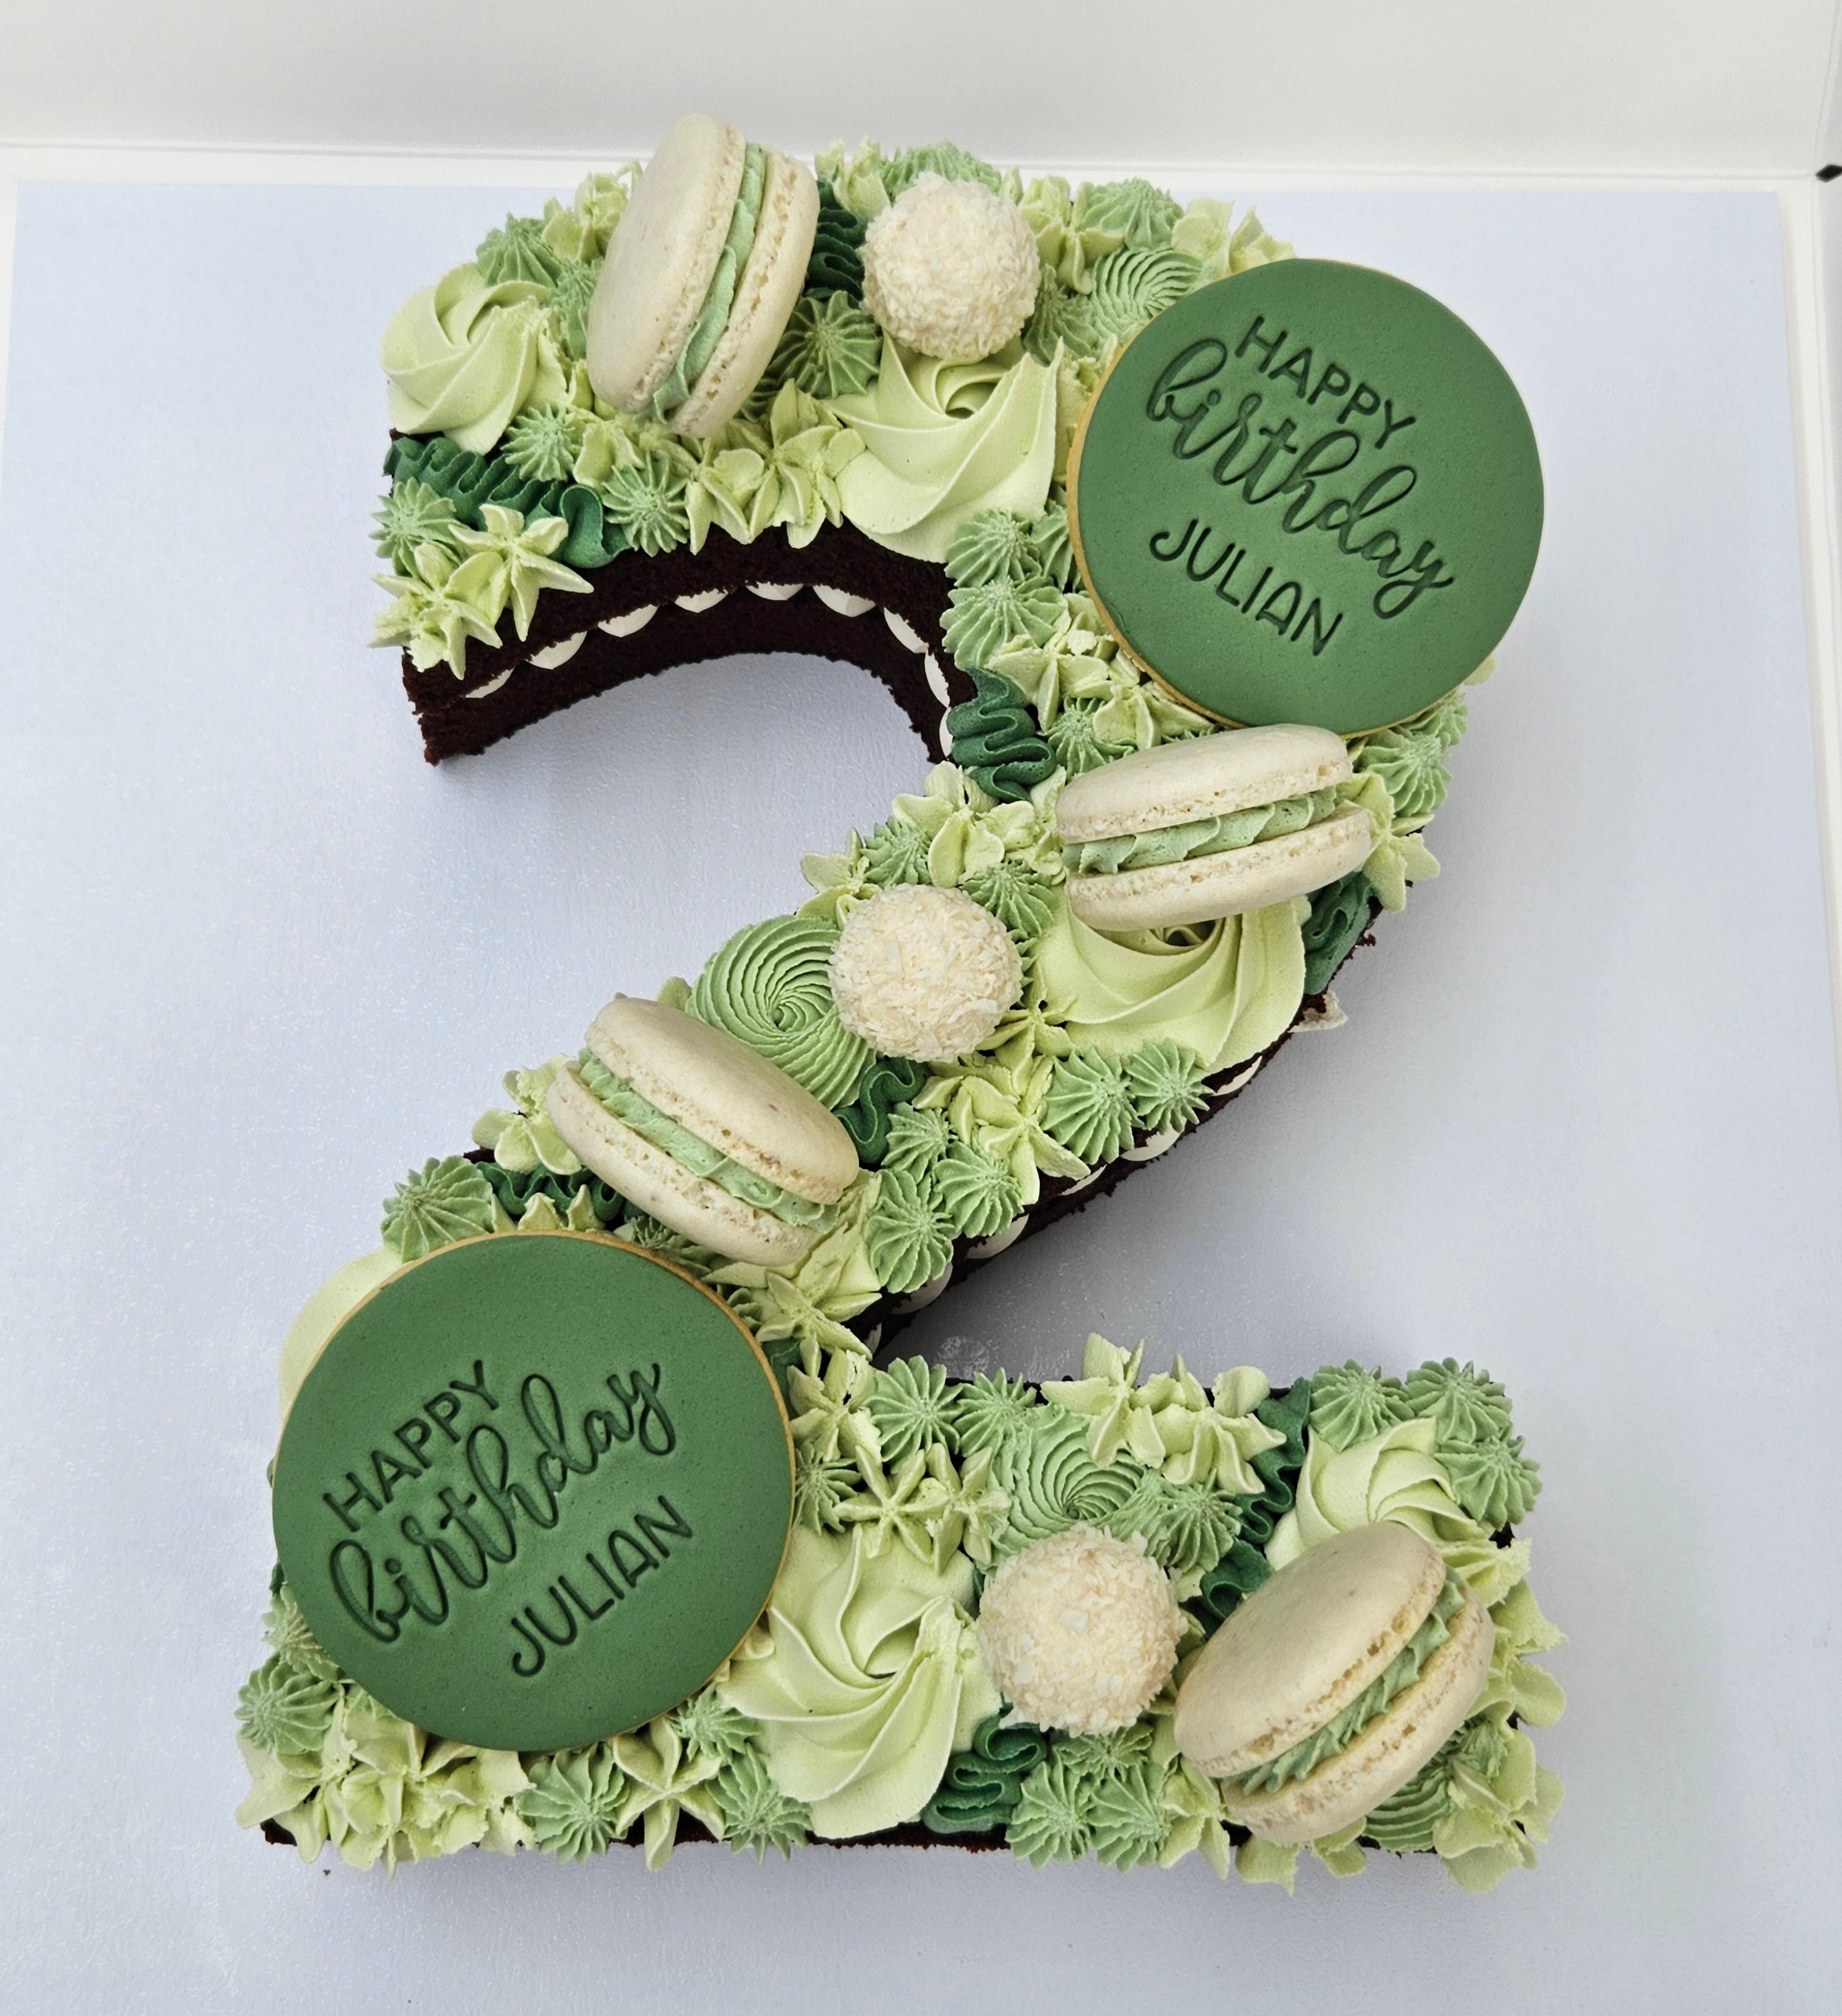 Macaron Number & Letter Cakes - TAYLORMADE Cakes & Sweets